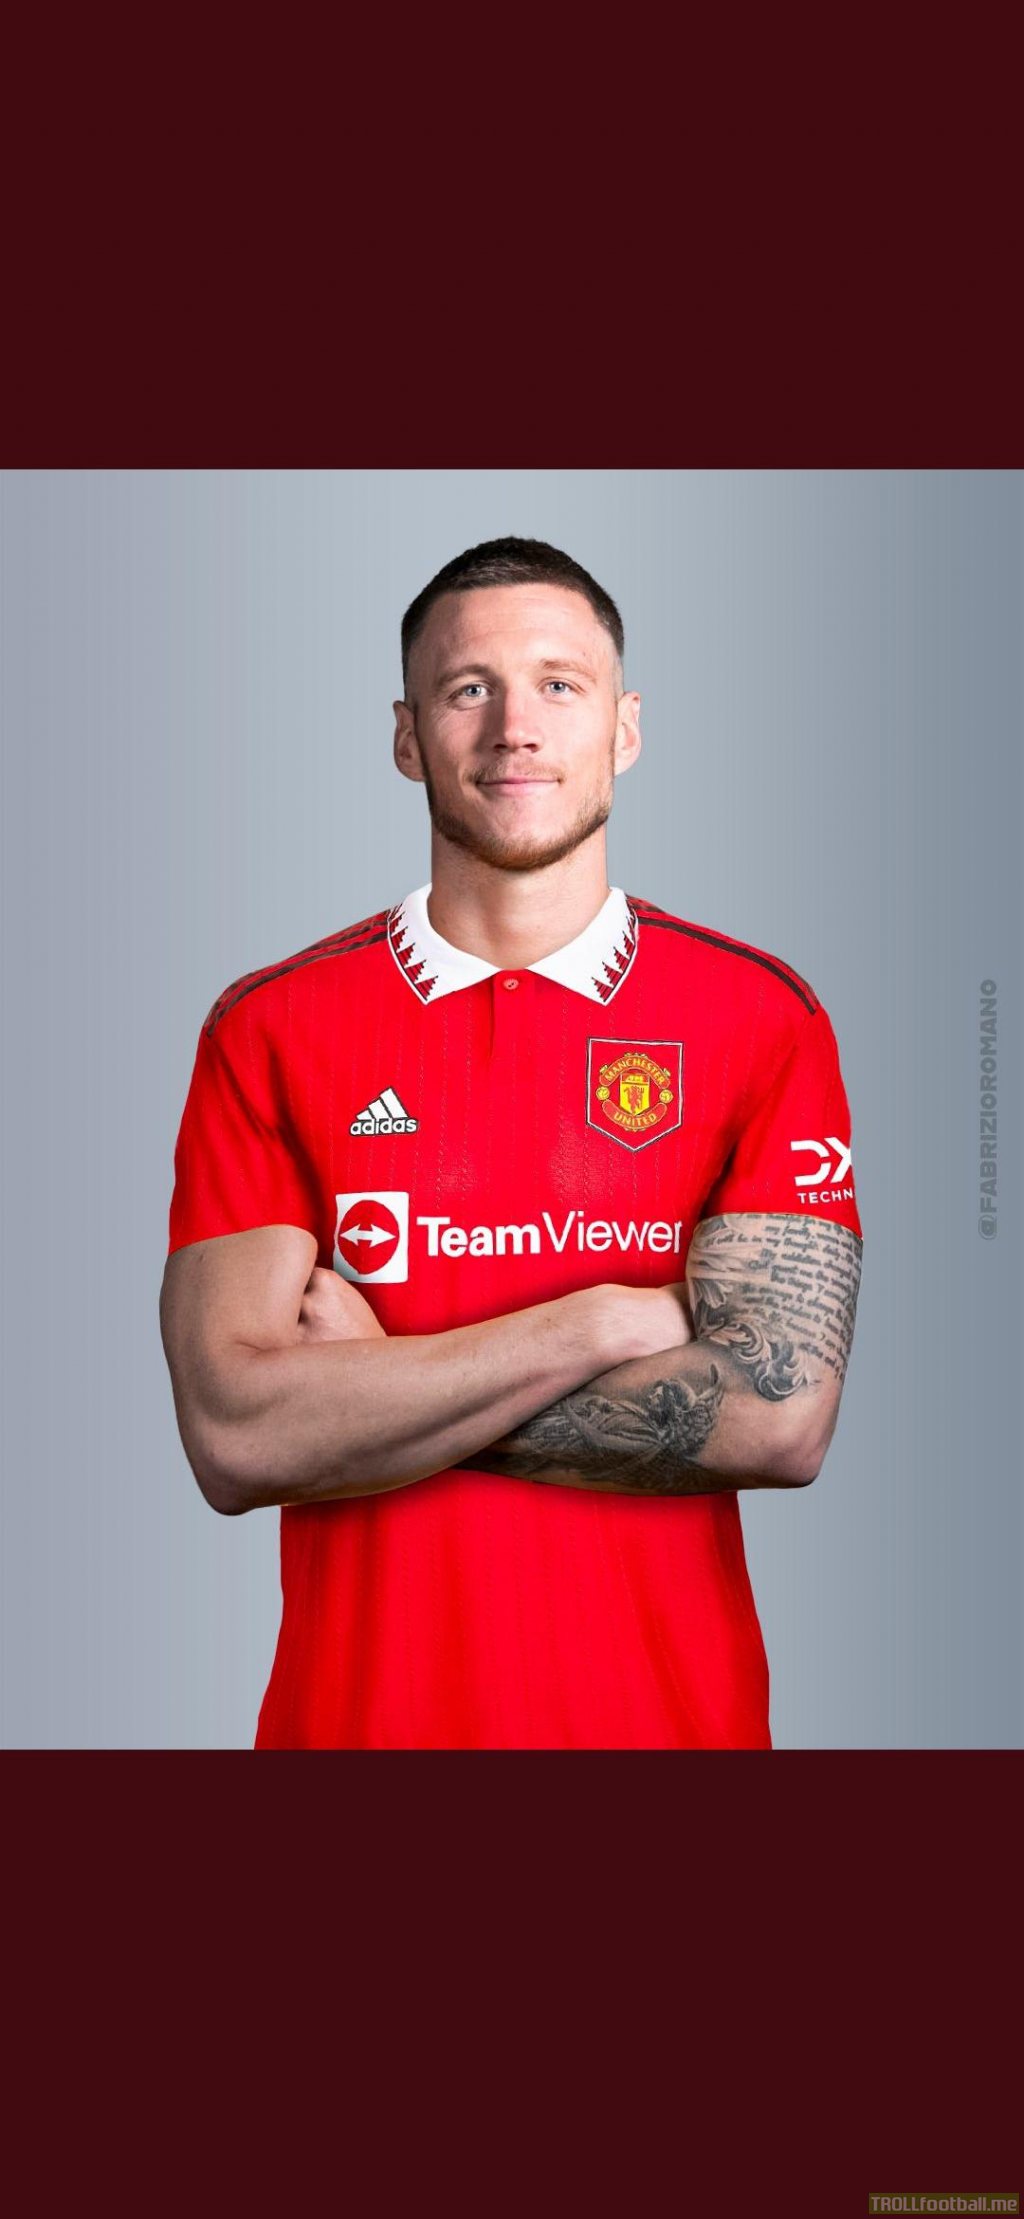 Wout Weghorst to Manchester United, here we go! All conditions revealed on Tuesday are confirmed: Man Utd pay €3m to Besiktas then sign Weghorst on loan from Burnley #MUFC Understand Weghorst will fly to Manchester today to undergo medical tests and then sign contracts.